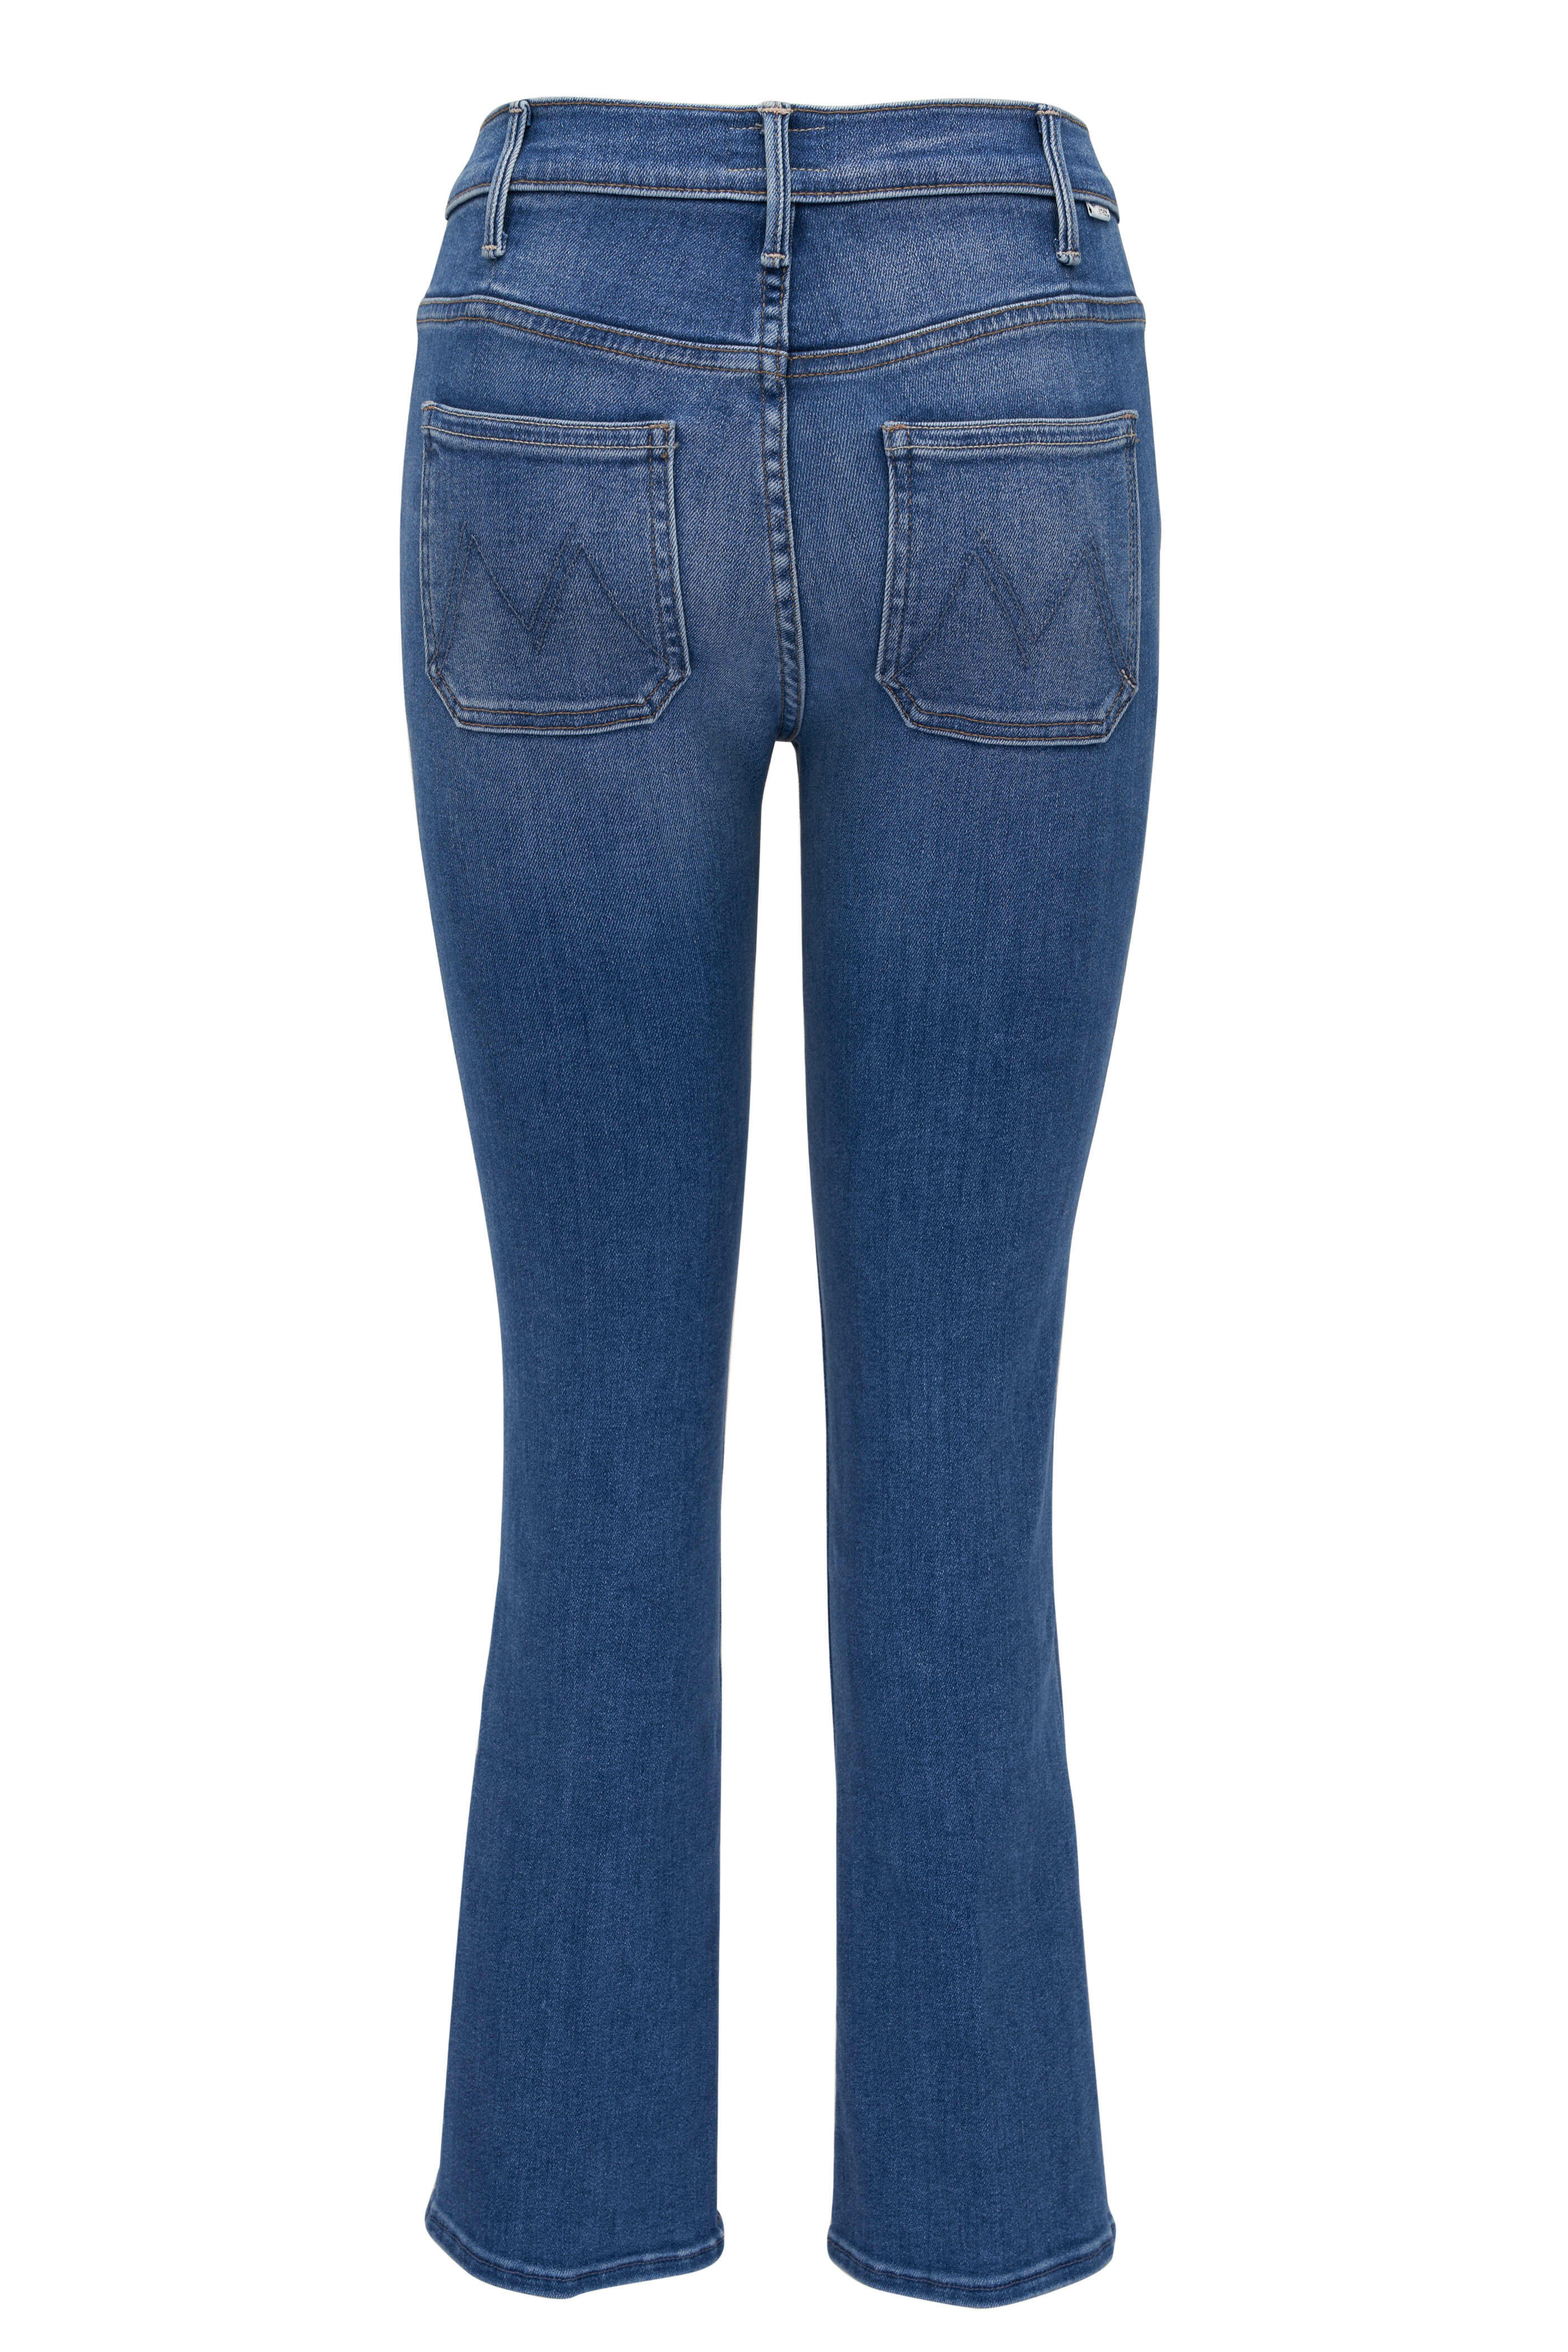 Mother - The Patch Pocket Insider Ankle Happy Pill Jean